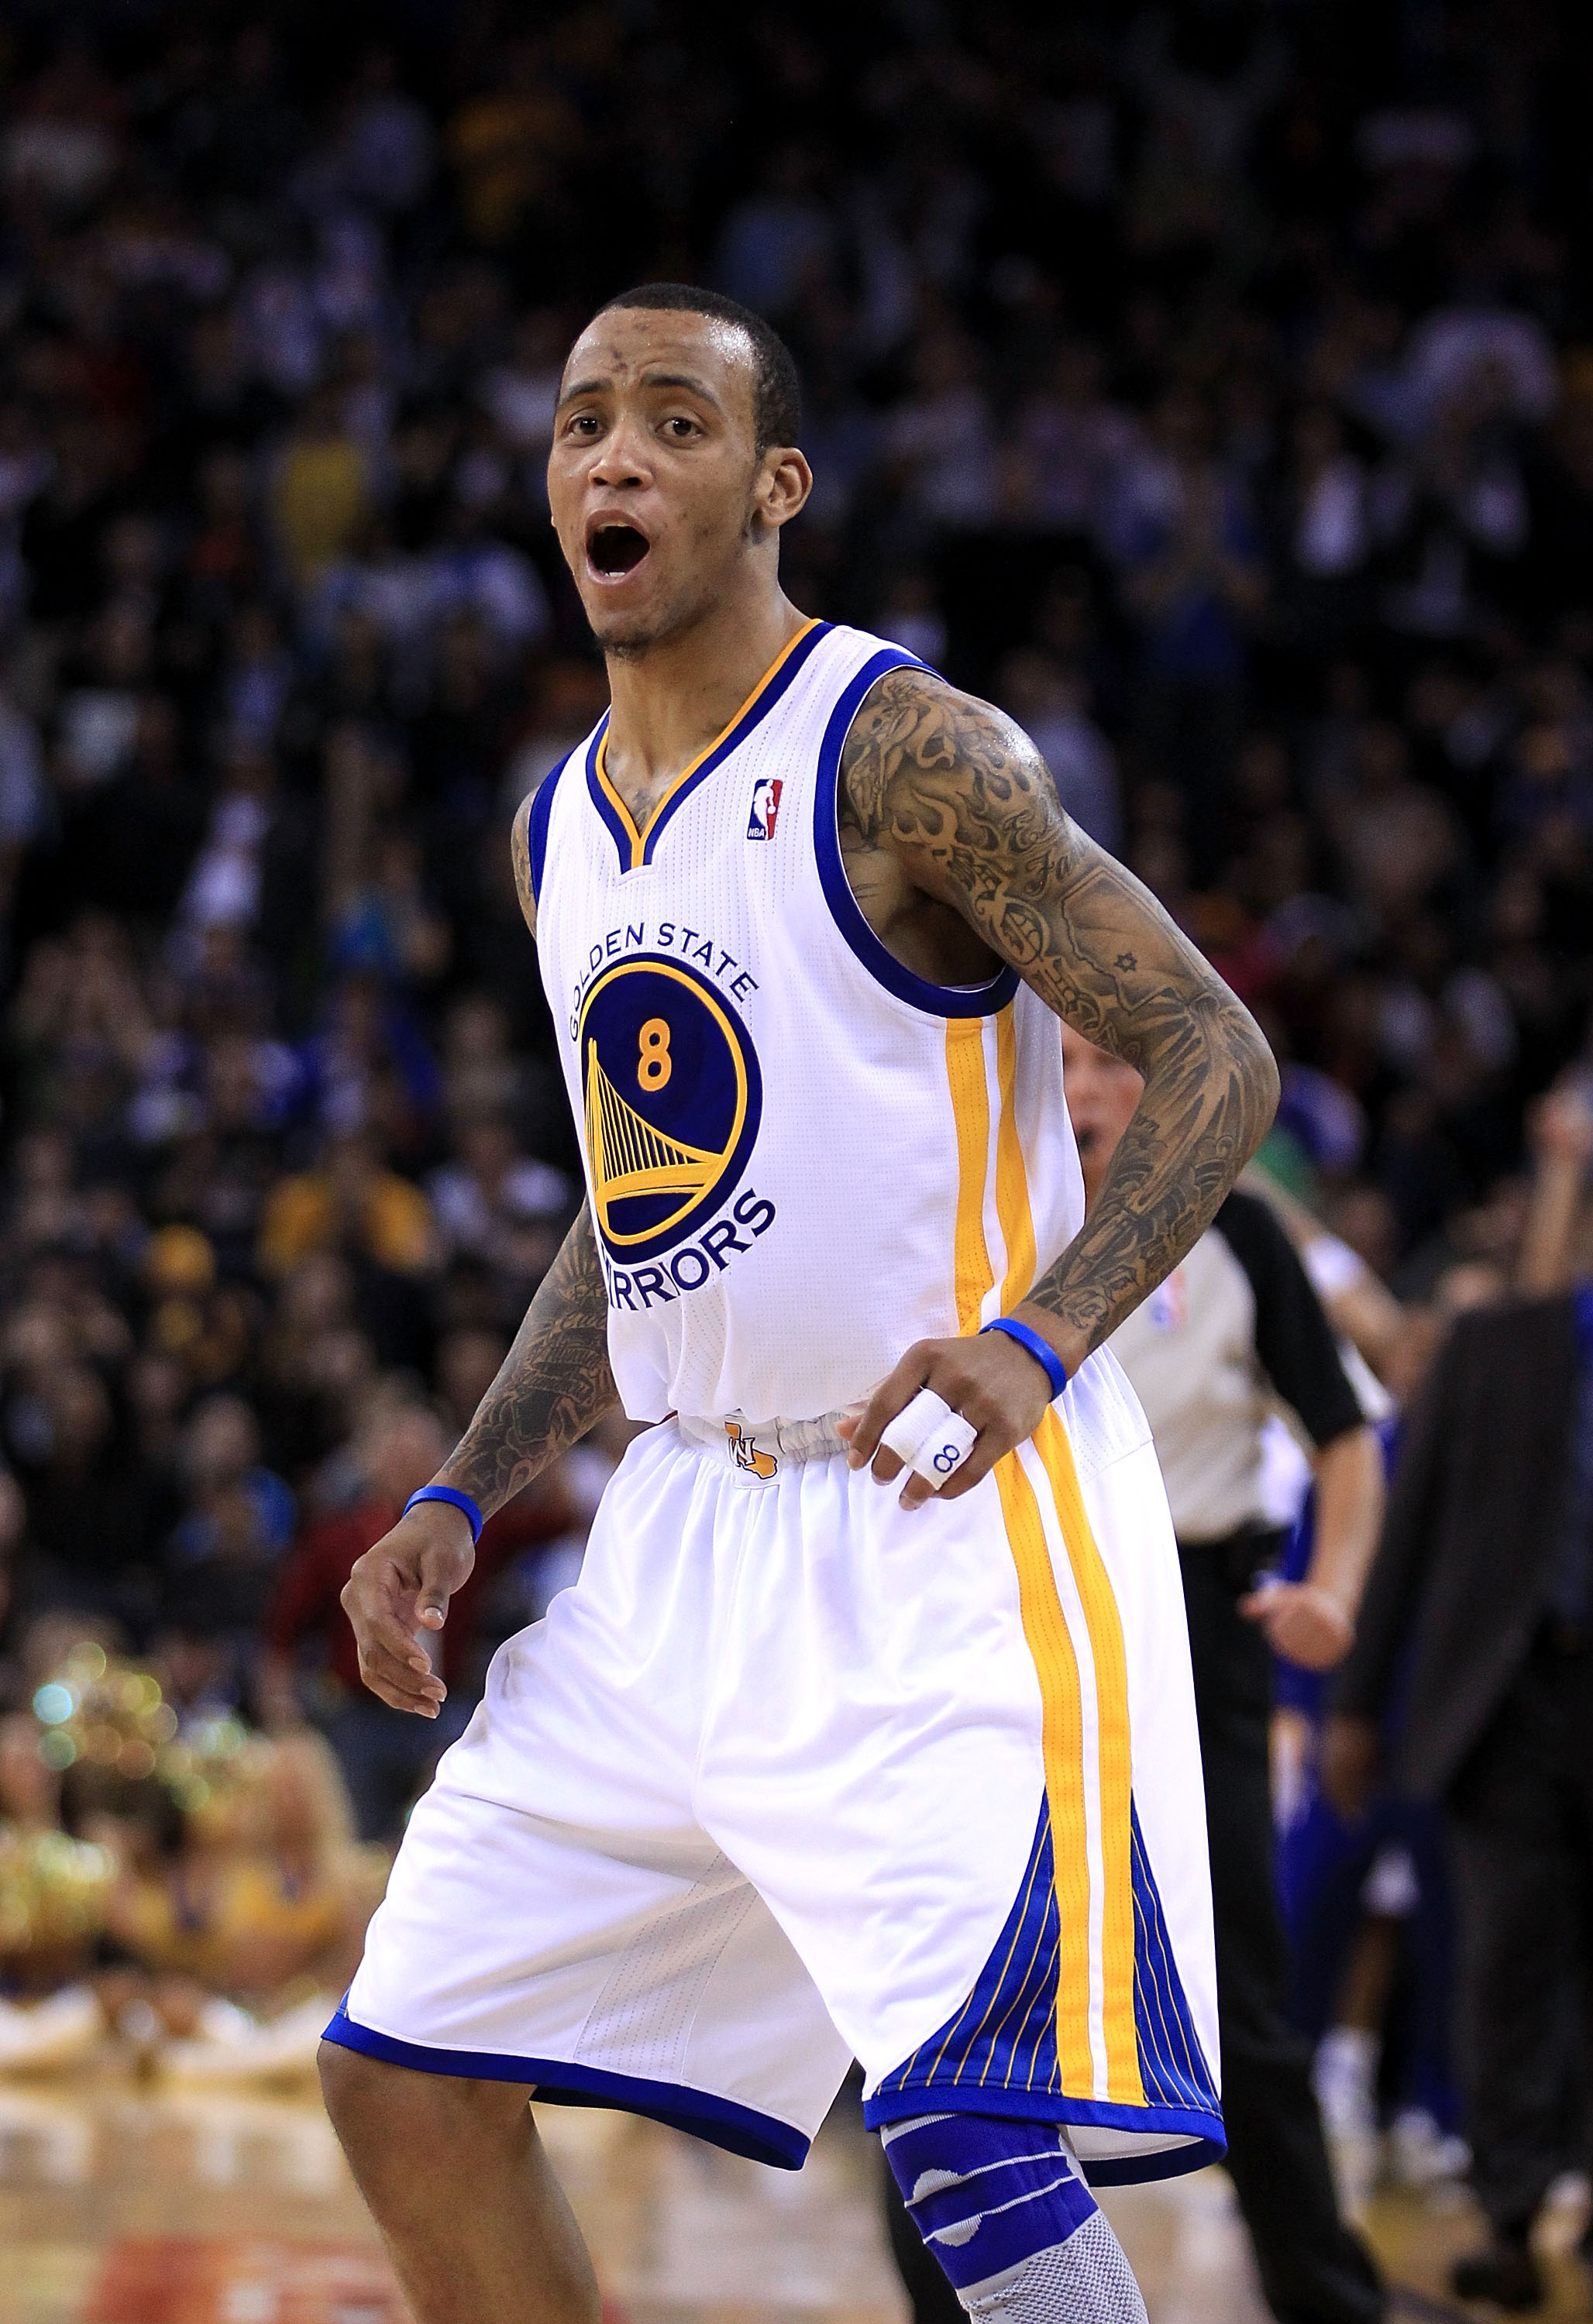 OAKLAND, CA - JANUARY 21:  Monta Ellis #8 of the Golden State Warriors reacts after the Warriors made a basket during their game against the Sacramento Kings at Oracle Arena on January 21, 2011 in Oakland, California. NOTE TO USER: User expressly acknowle